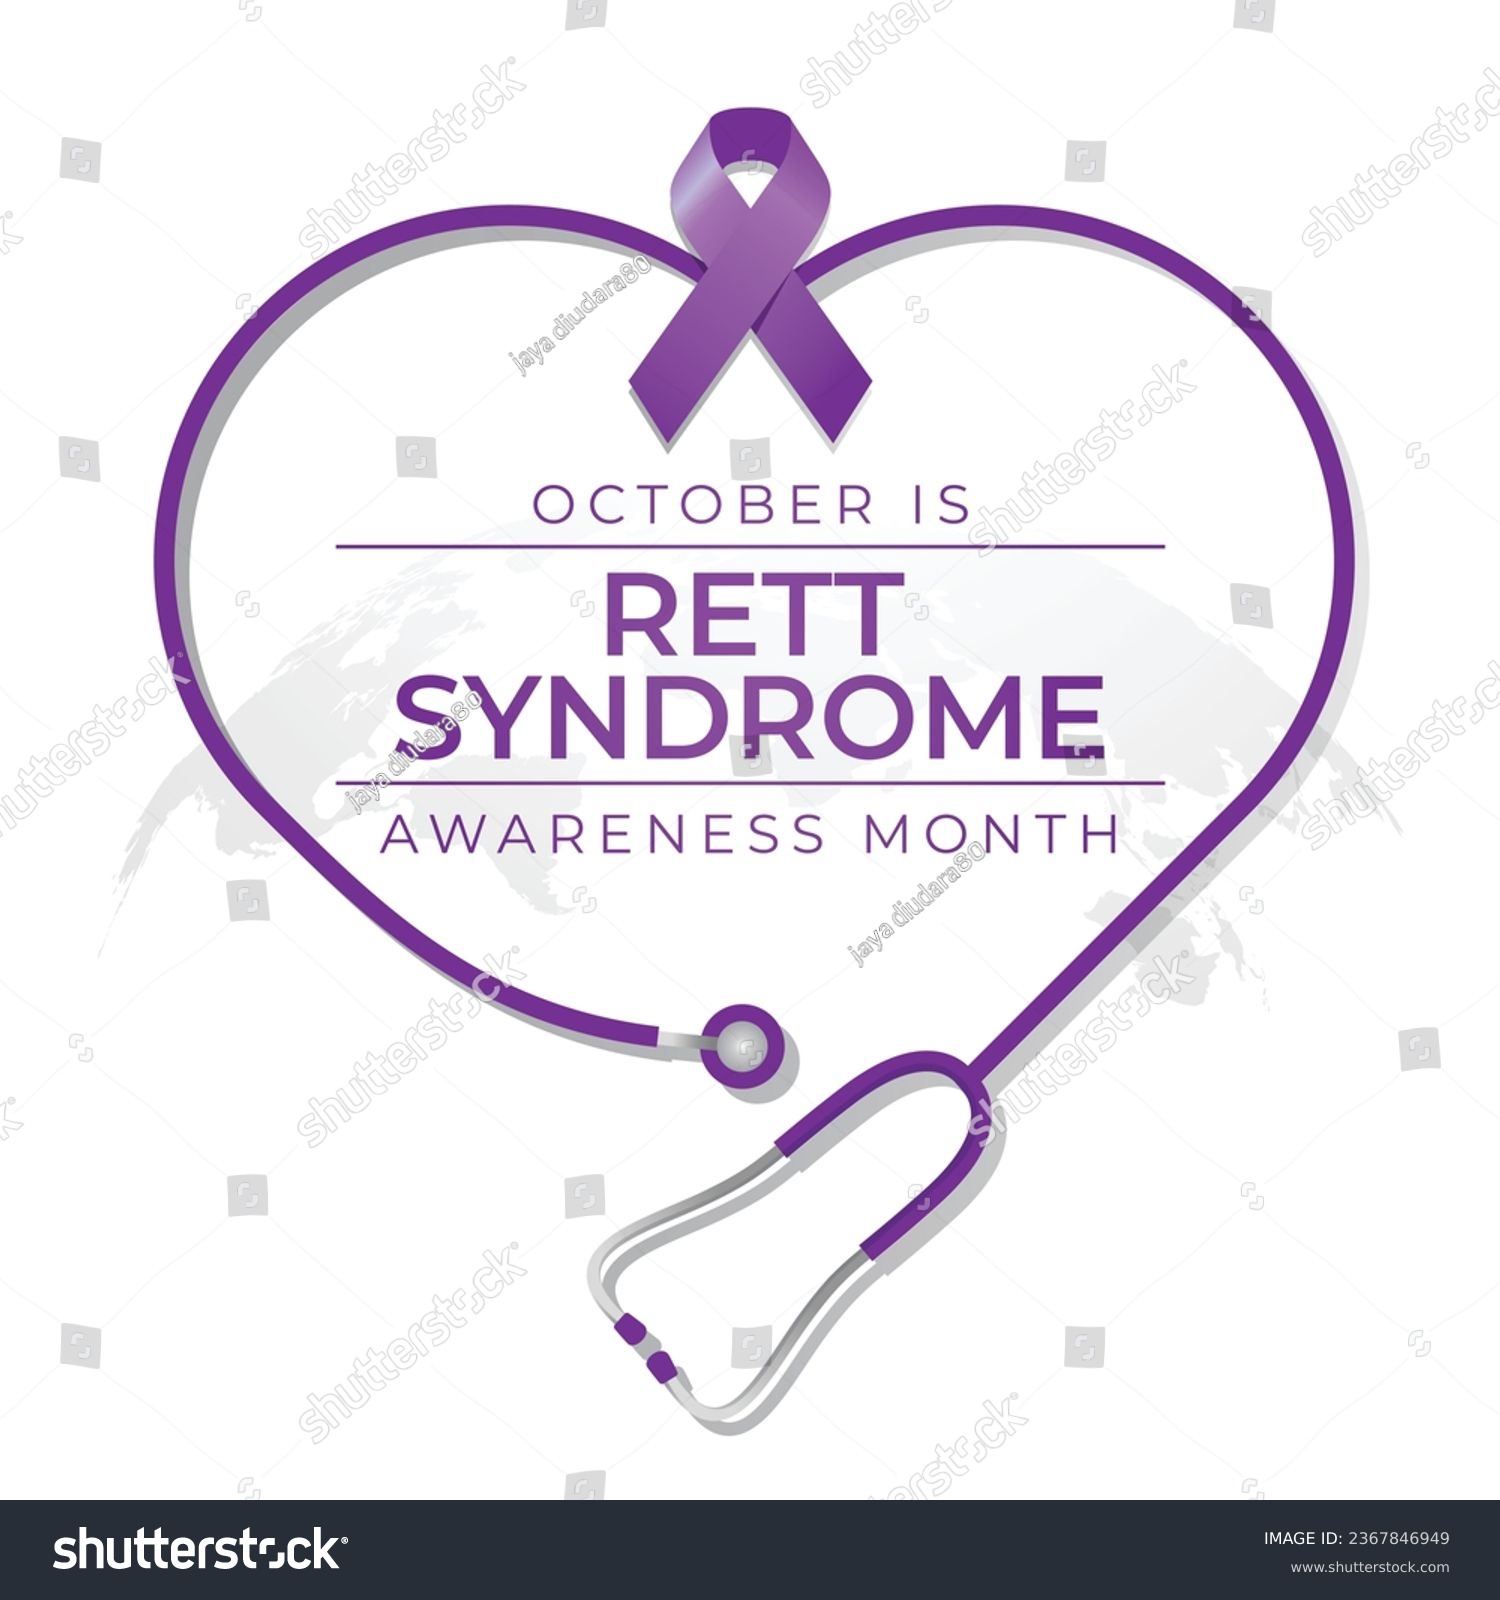 SVG of Flyers promoting Rett Syndrome Awareness Month or associated events can utilize Rett Syndrome Awareness Month vector illustrations. design of a flyer, a celebration. svg